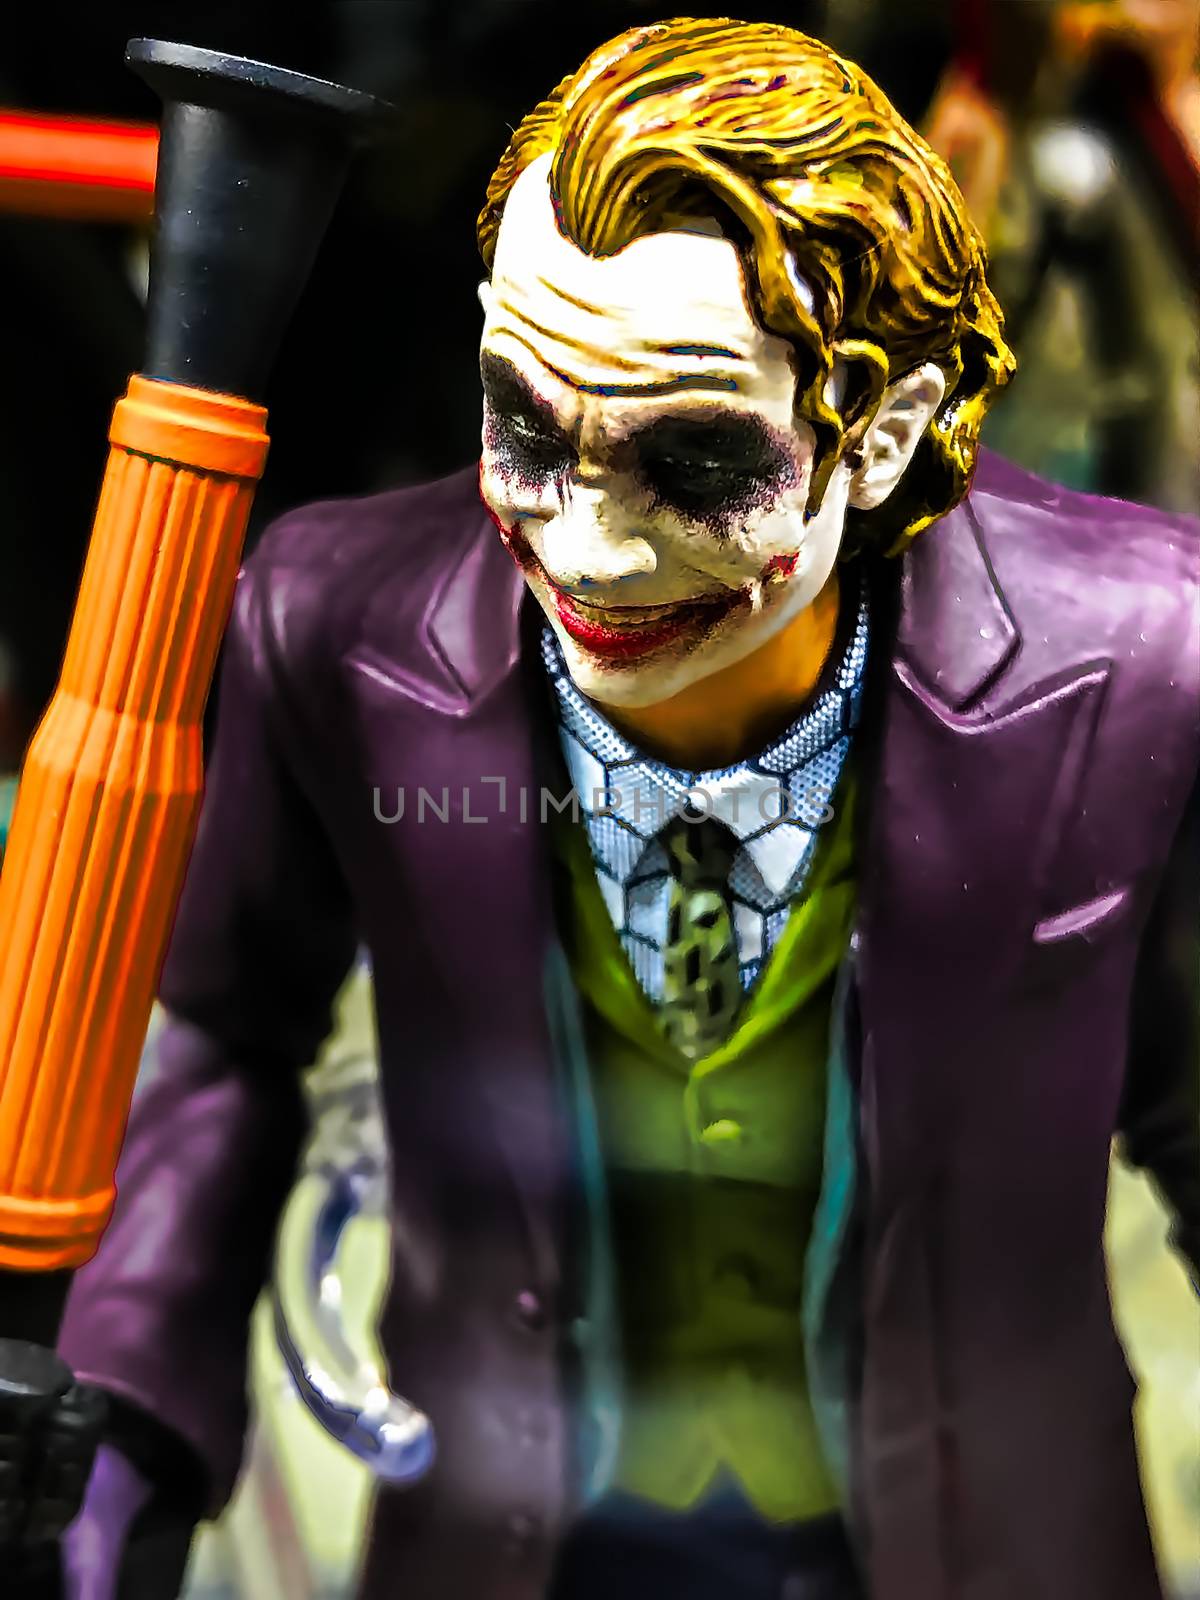 Osaka, Japan - Apr 23, 2019: Focused on fictional character figure from DC comics BATMAN The Dark Knight Joker figure out of toys shop.This figure 15cm size model. by USA-TARO